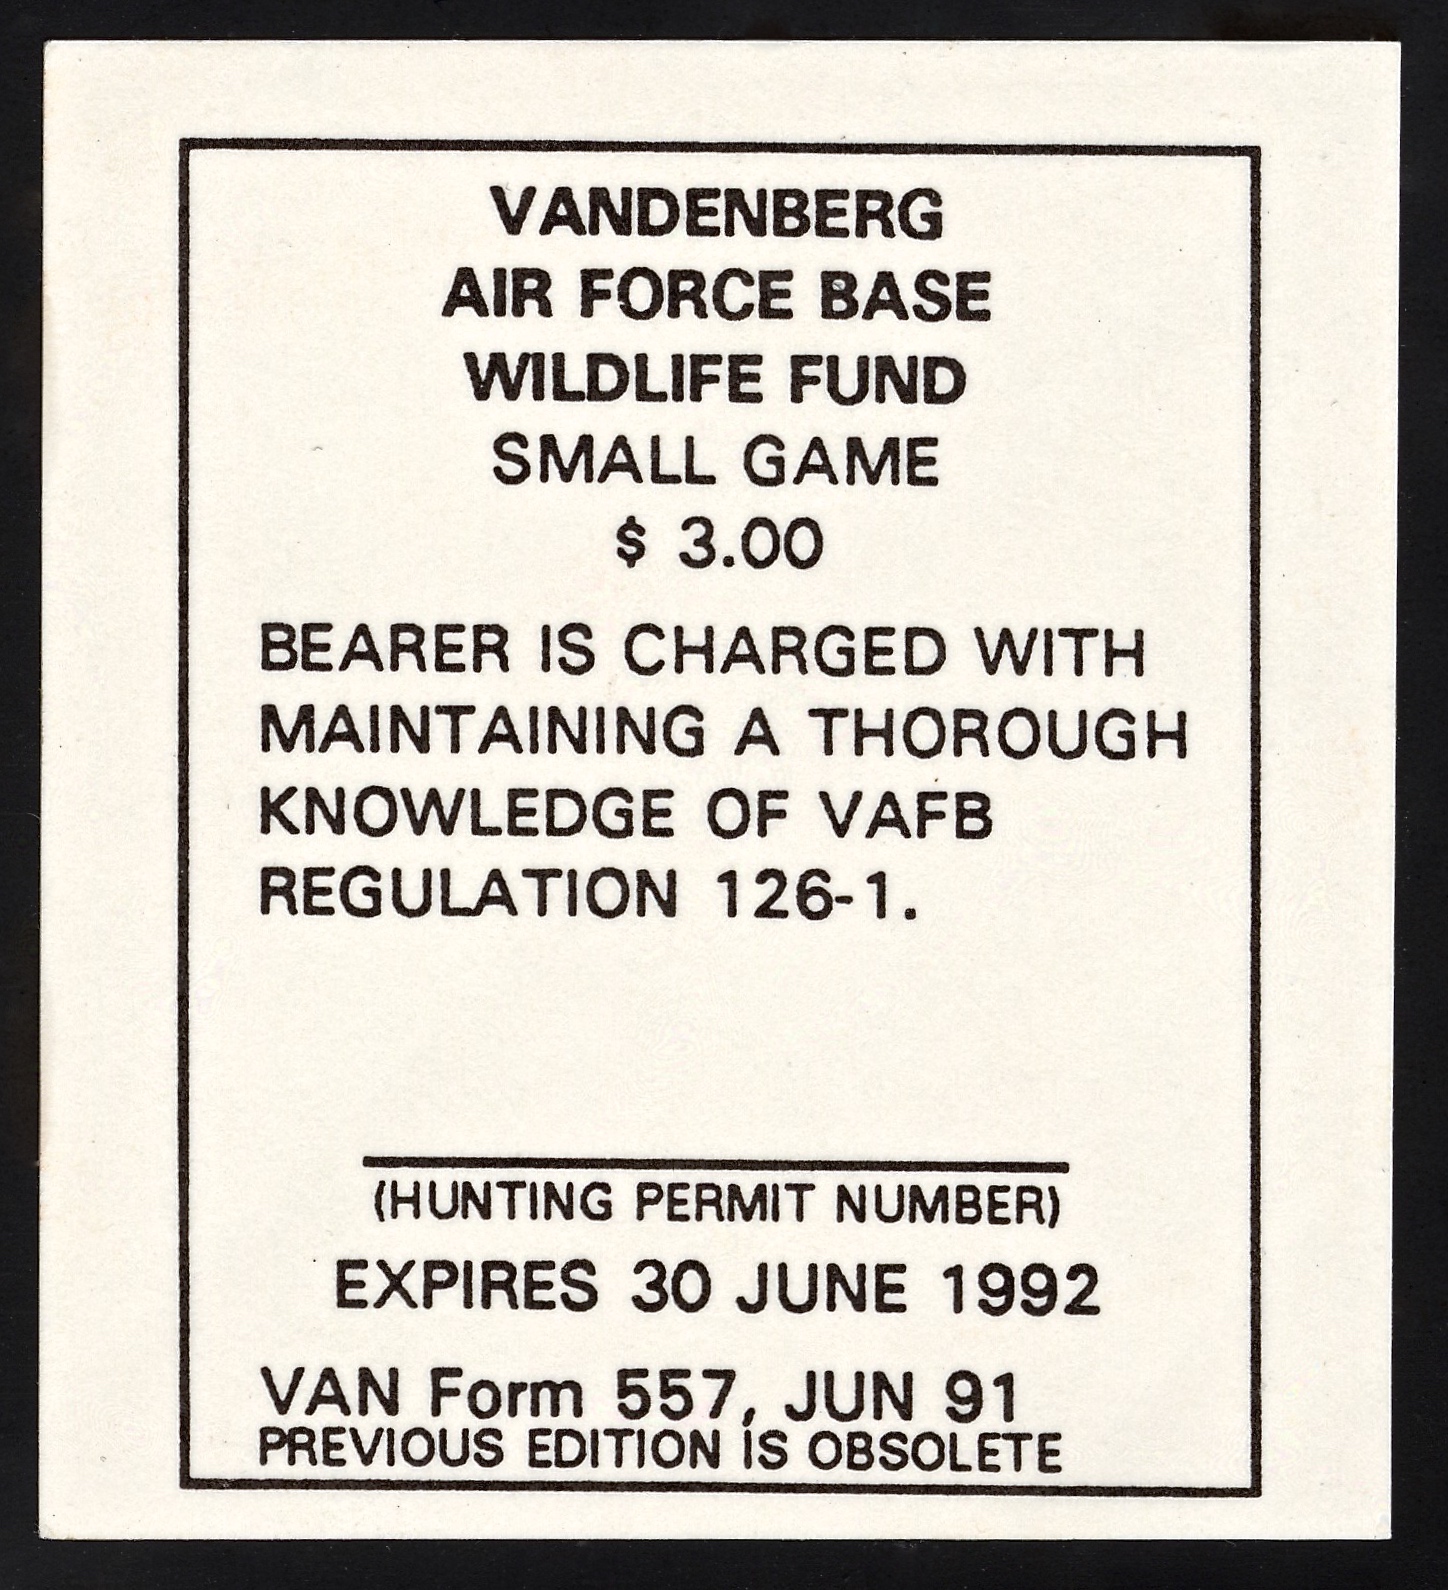 1991-92 VAFB Small Game